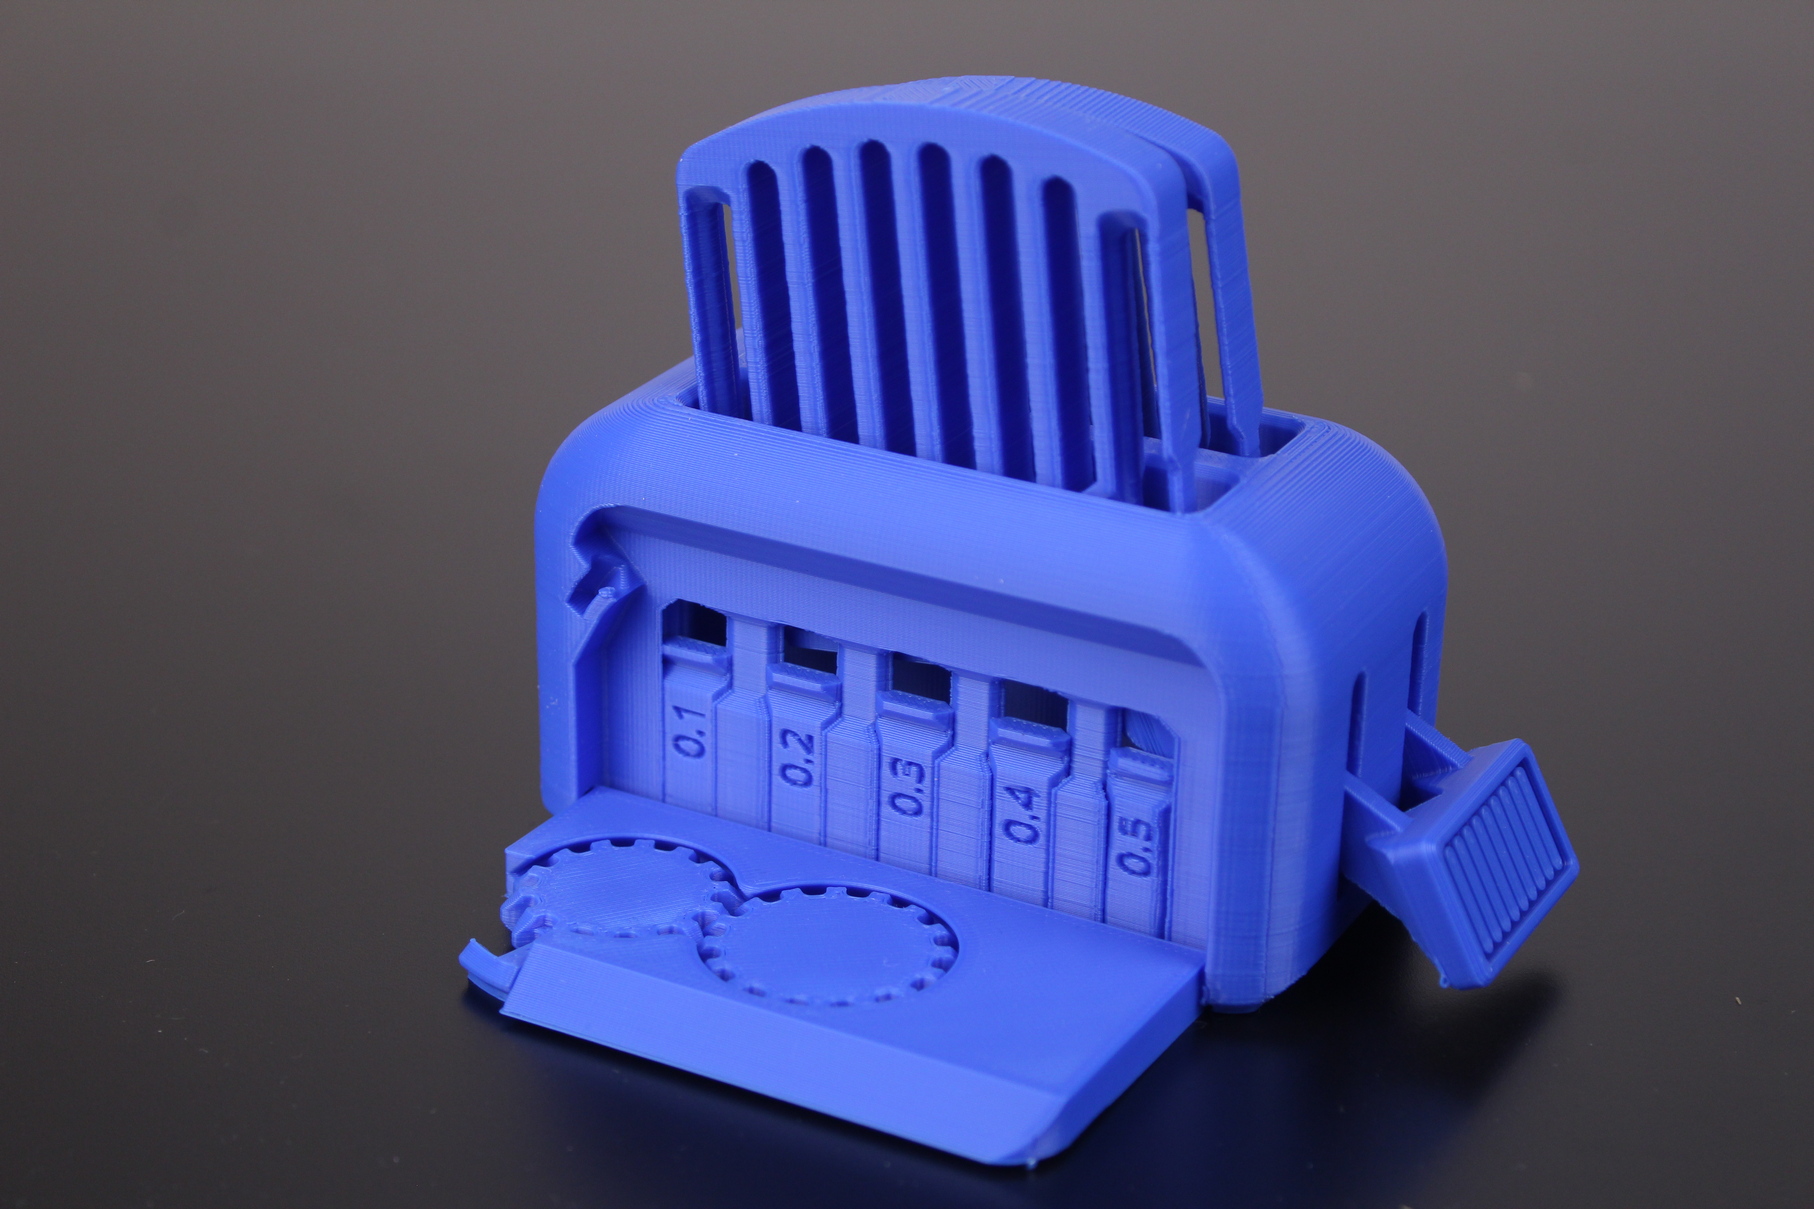 Torture Toaster printed on Voxelab Aries 3 | Voxelab Aries Review: A Worthy Upgrade for the Aquila?